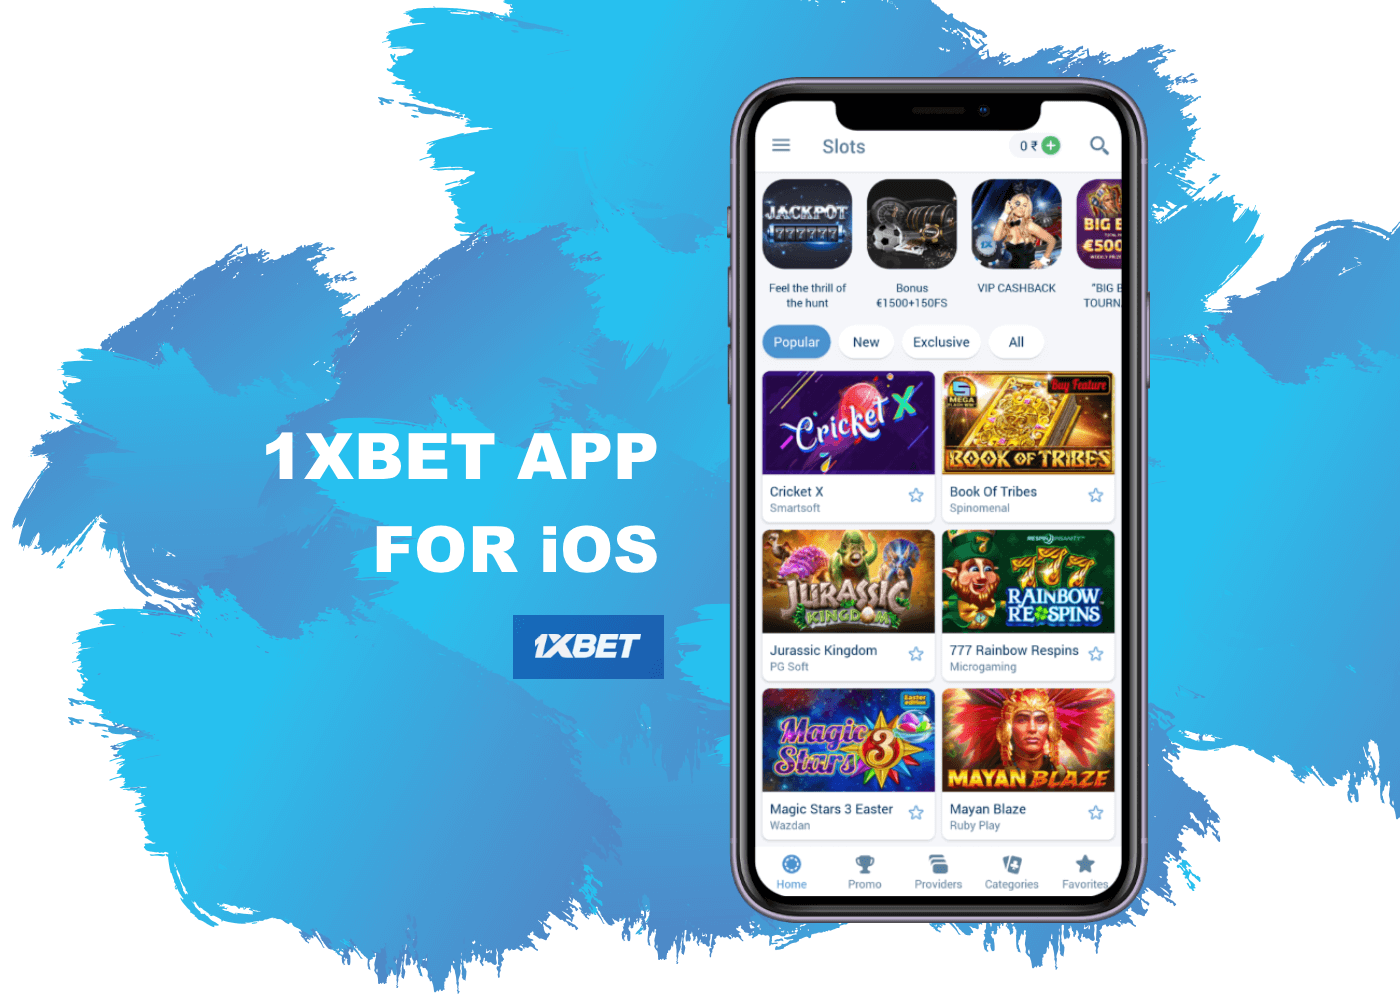 Step-by-step instructions on how to install the 1xbet app on iPhone or iPad